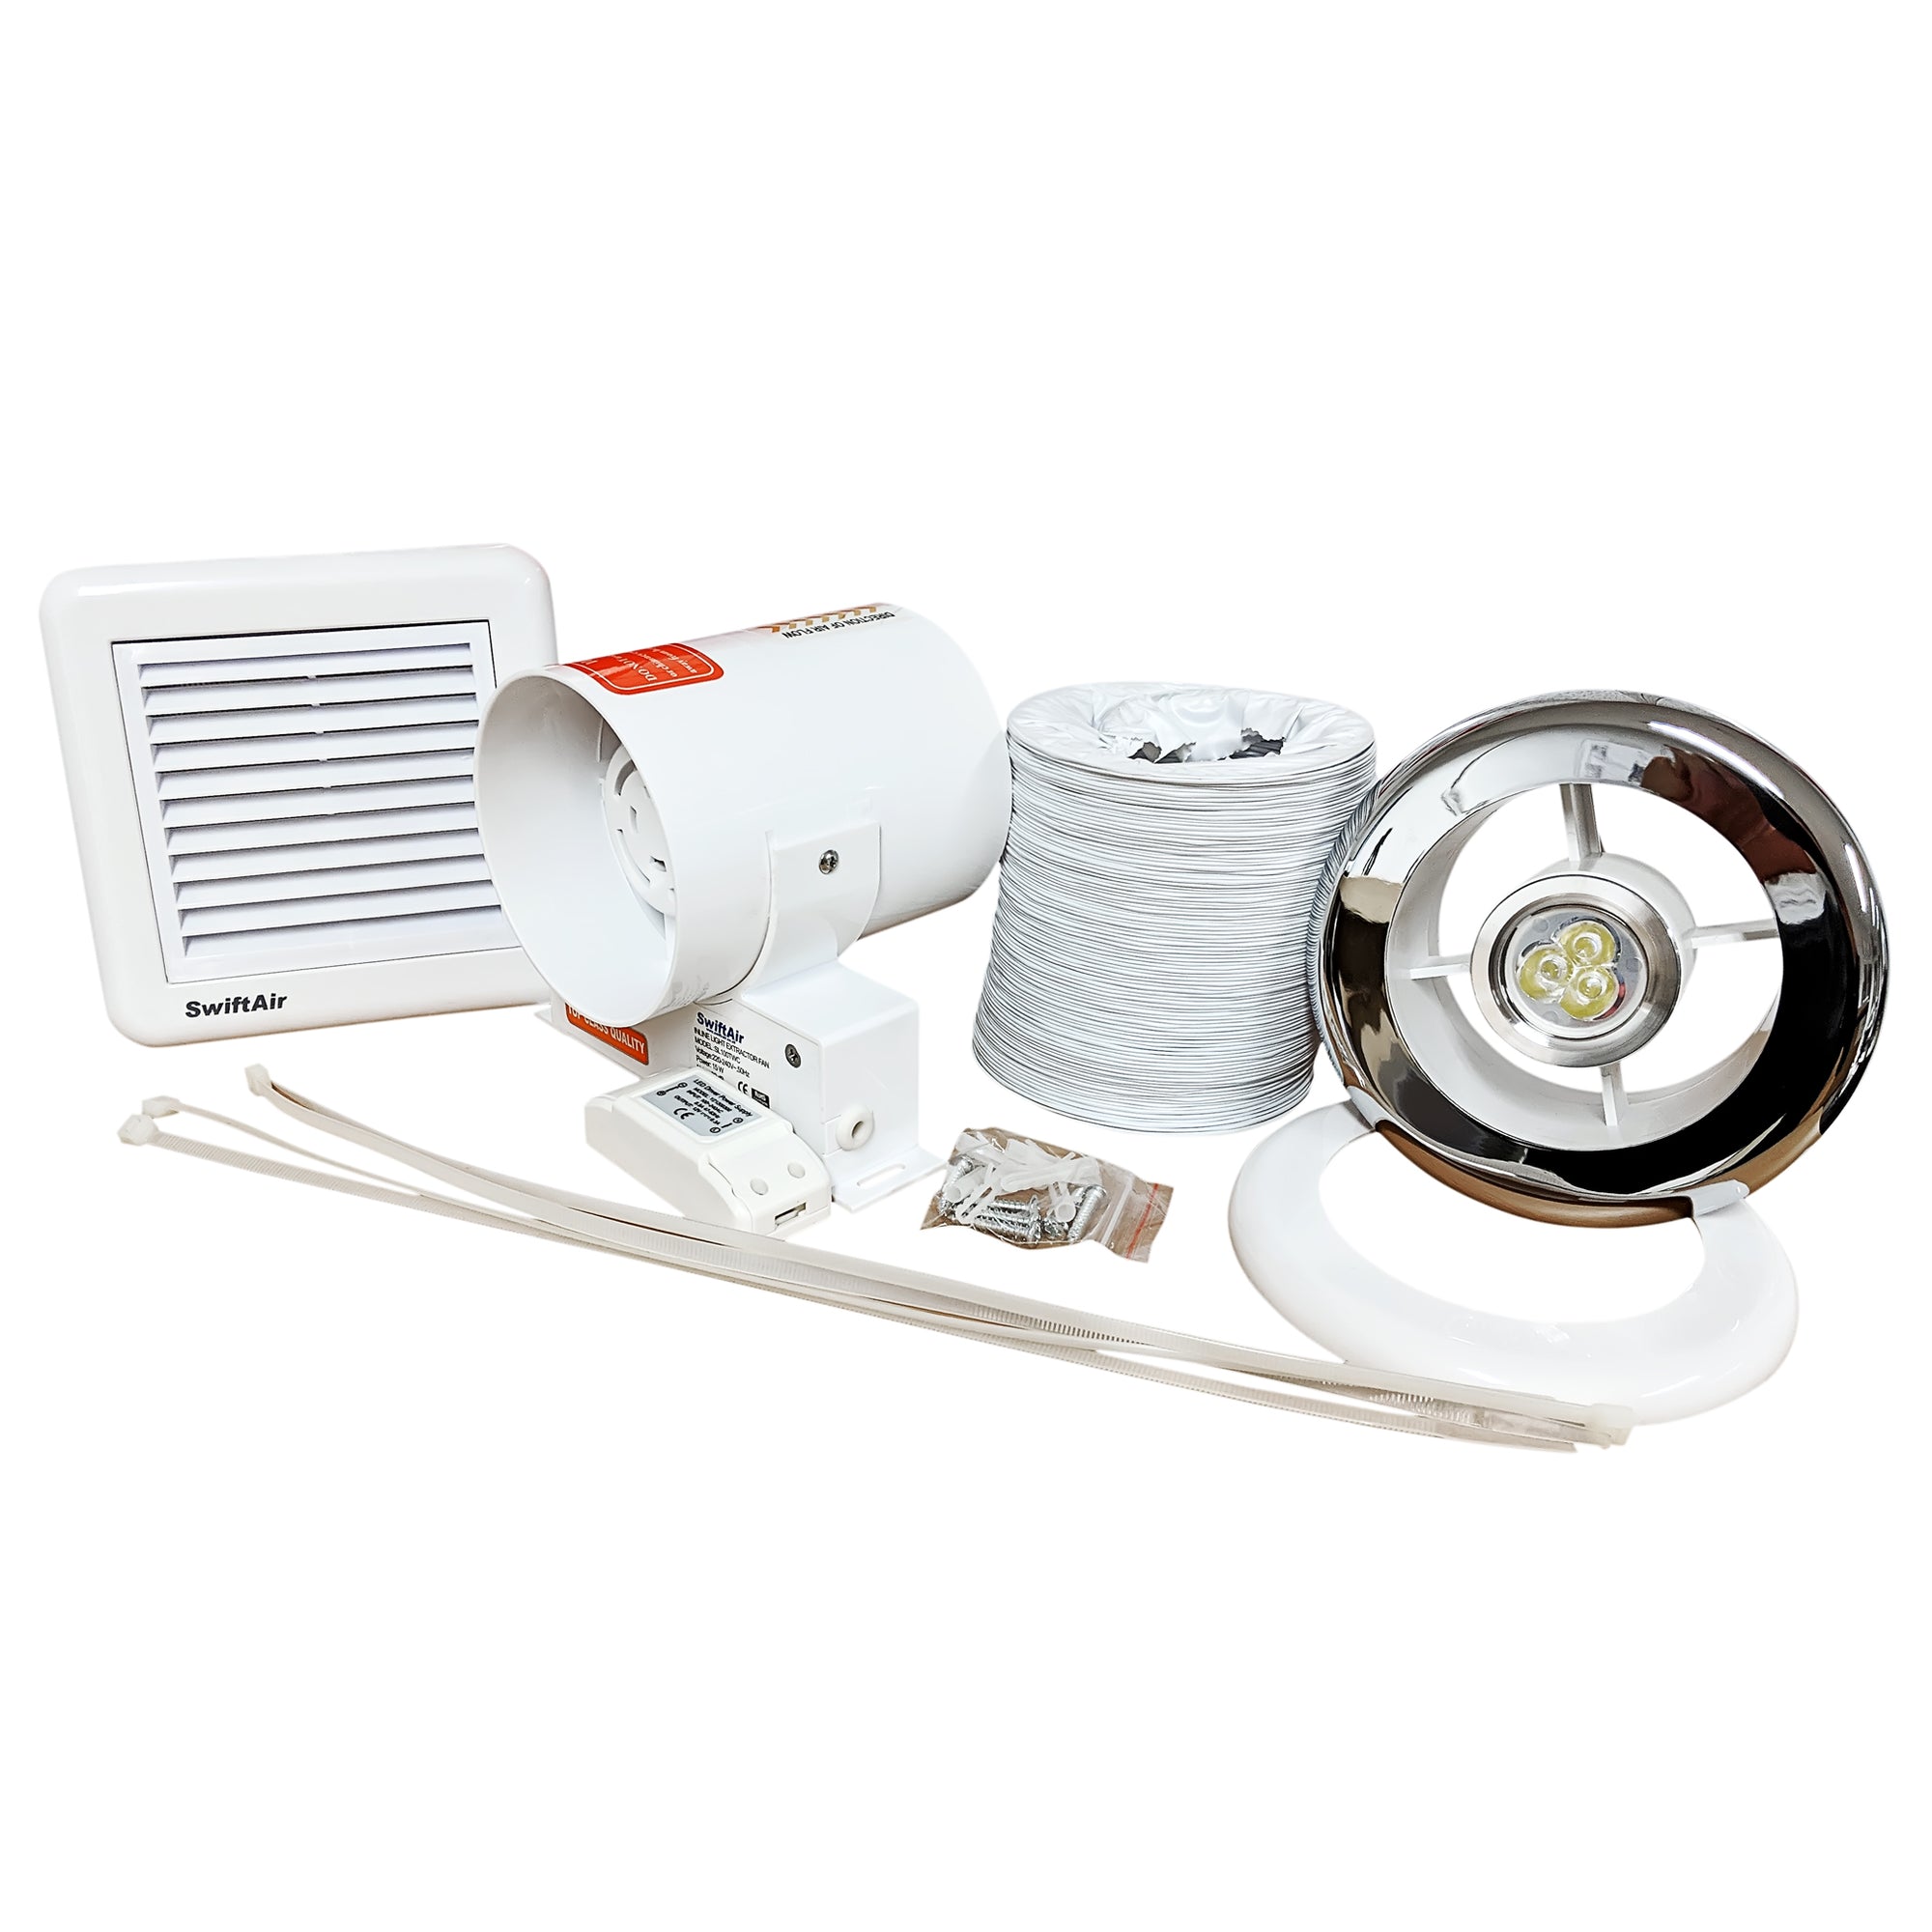 SL100TWC Bathroom Shower Extractor Fan with SELV Light Kit Chrome Grill - Std or Timer 4"